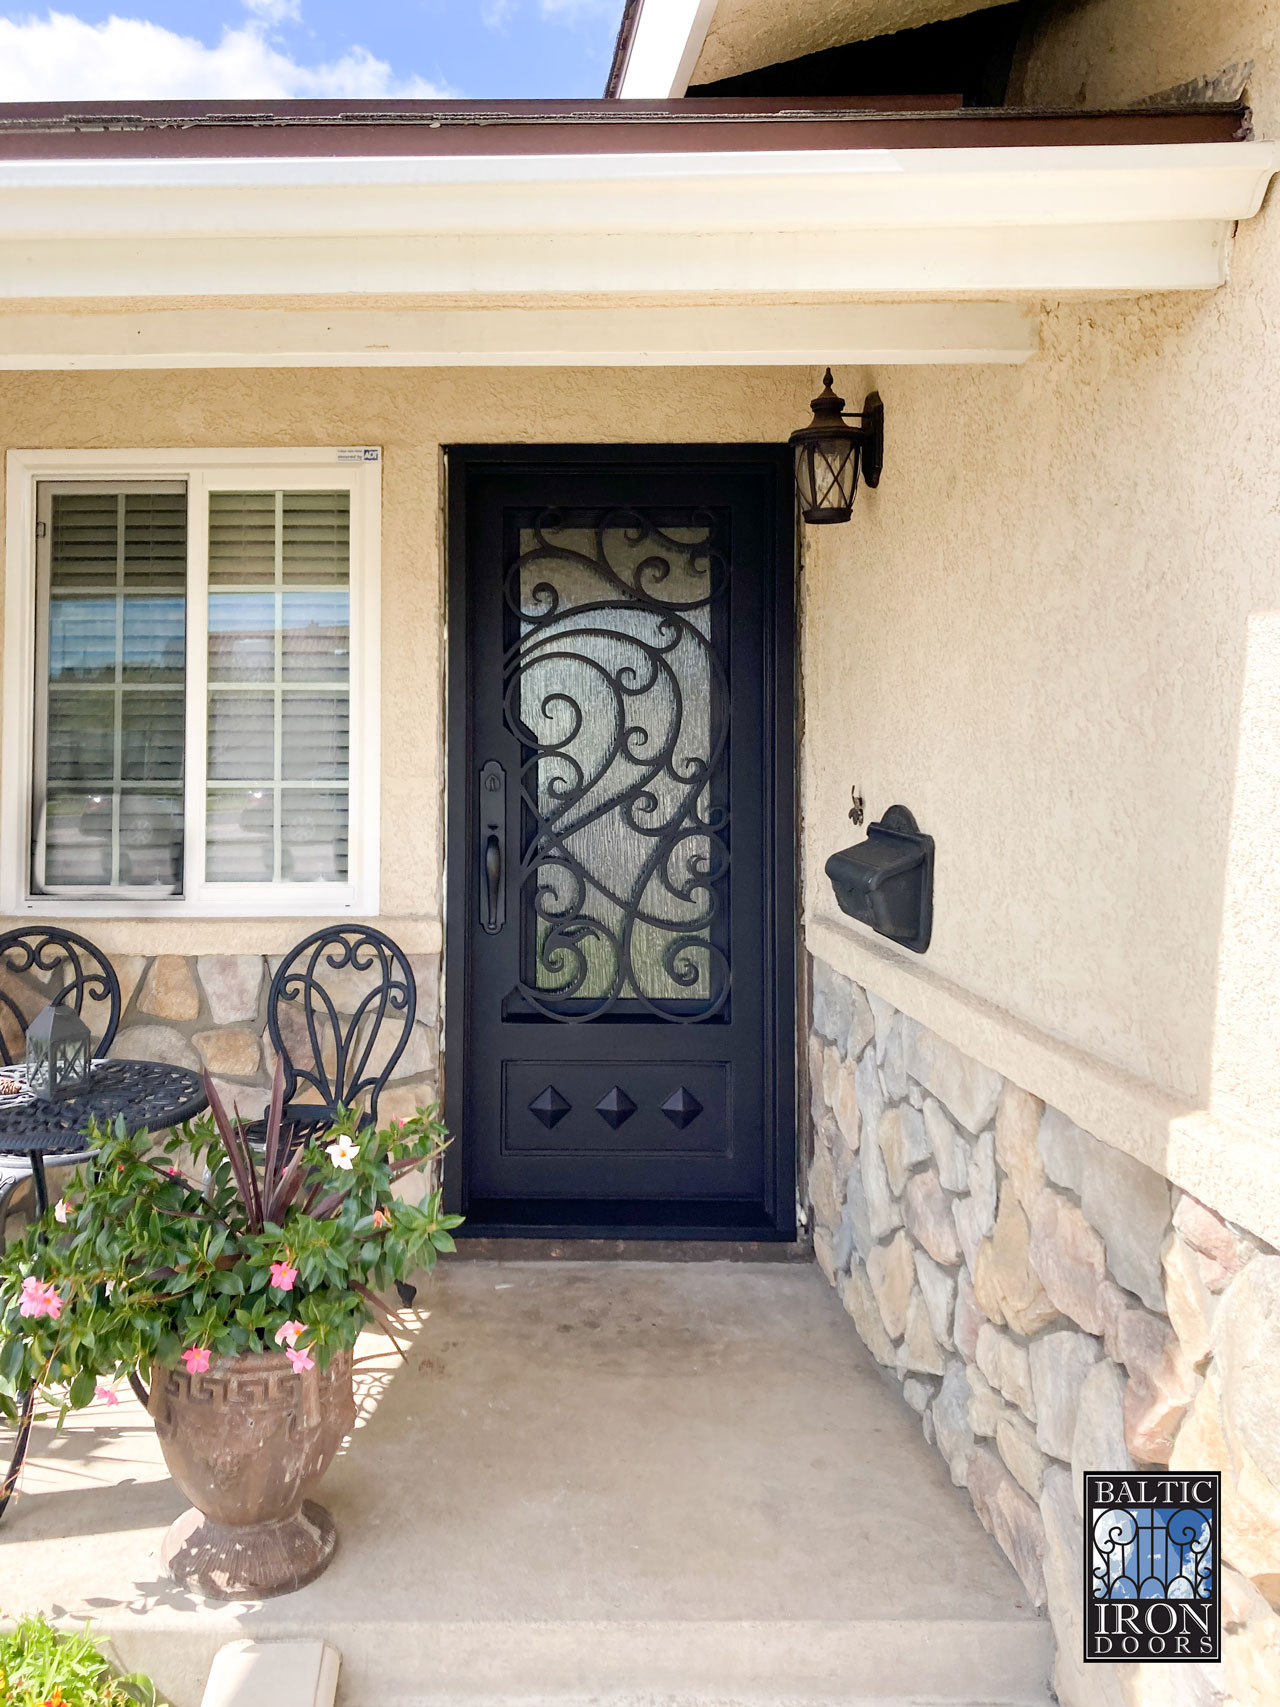 Transform your Orange County transitional-style home with metal steel doors. Explore the versatility and durability of custom doors, call our team today!